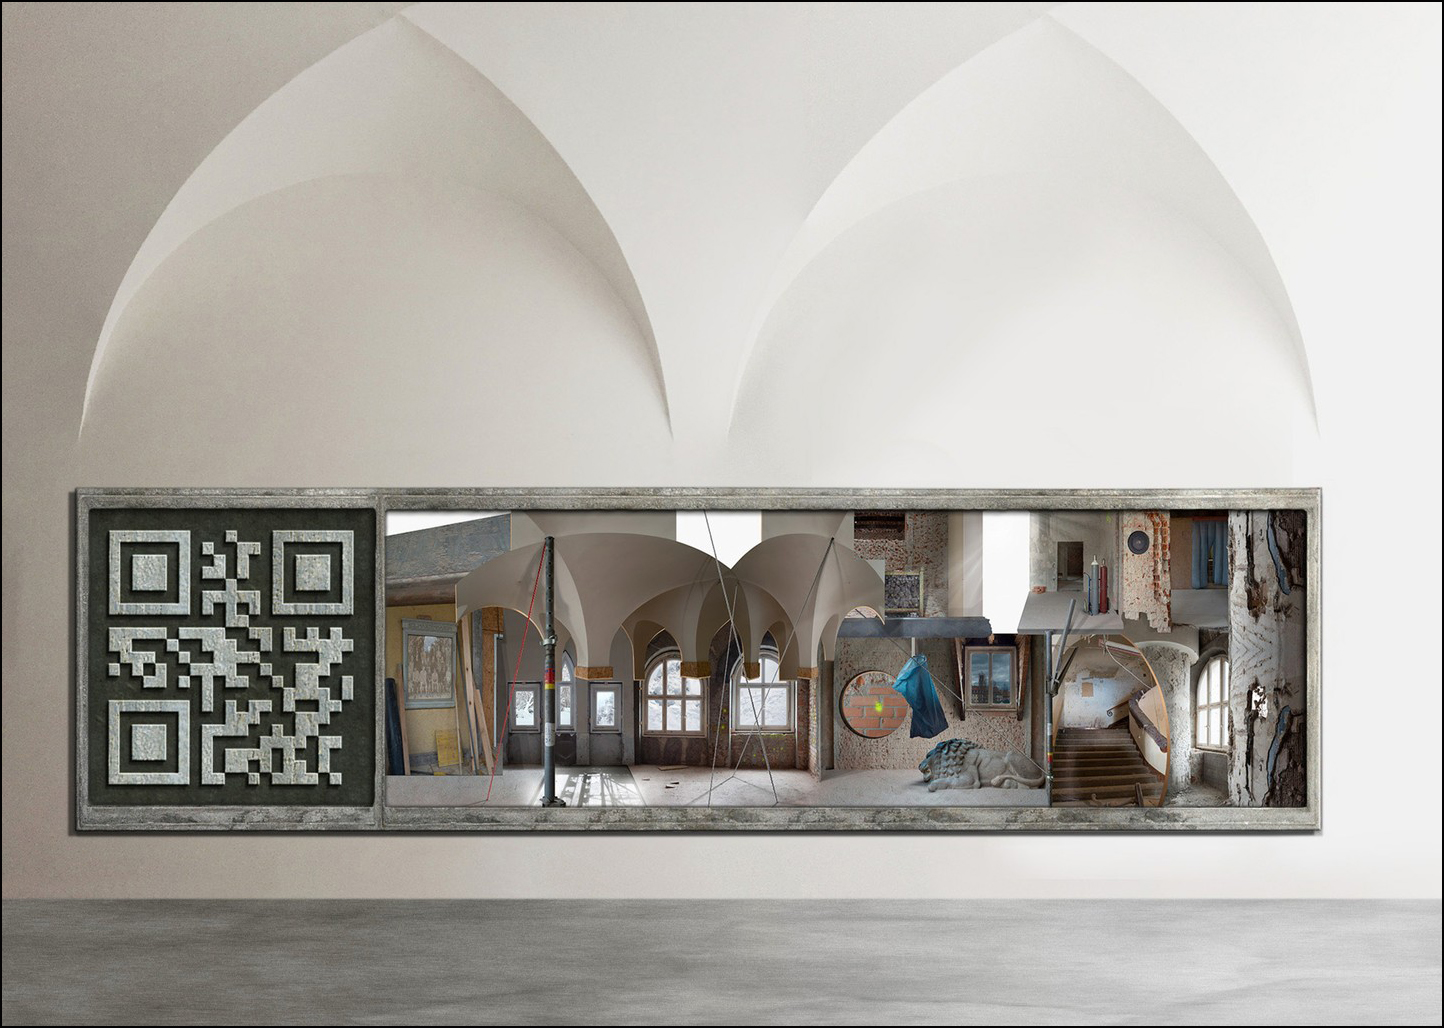 Digital Amnesia or Constructed Memory is now permanently installed at Munich's historic Maximilian Gymnasium. explore the project further on its exclusive <a href="https://da-cm.de/website/">website</a>